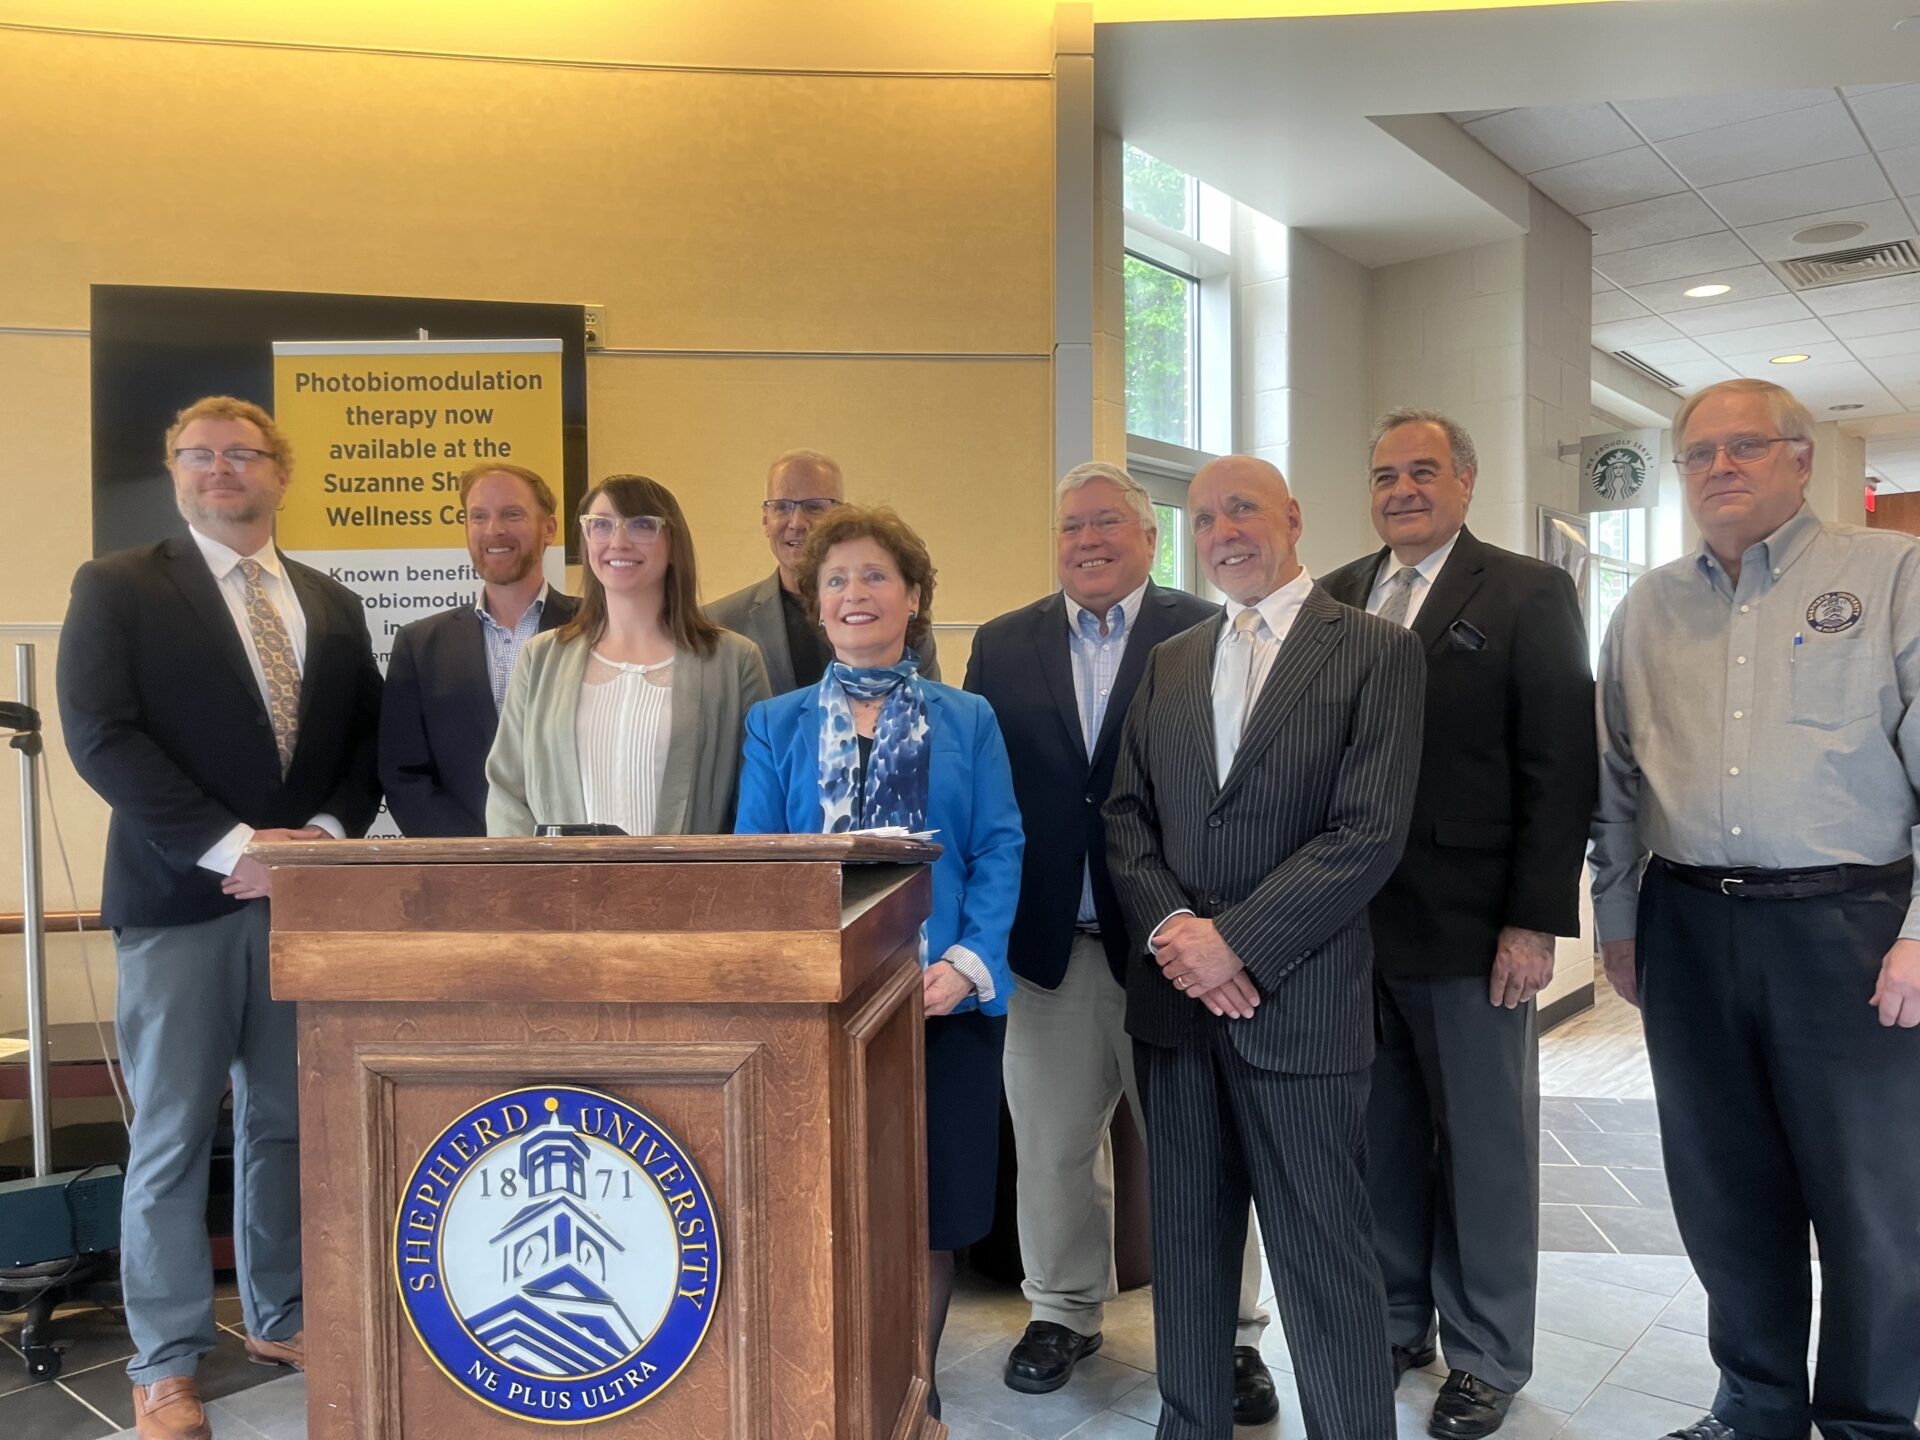 A group of people in suits stands behind a podium, smiling and posing for a picture. There are nine people split into two rows. On the podium the seal of Shepherd University is displayed prominently.